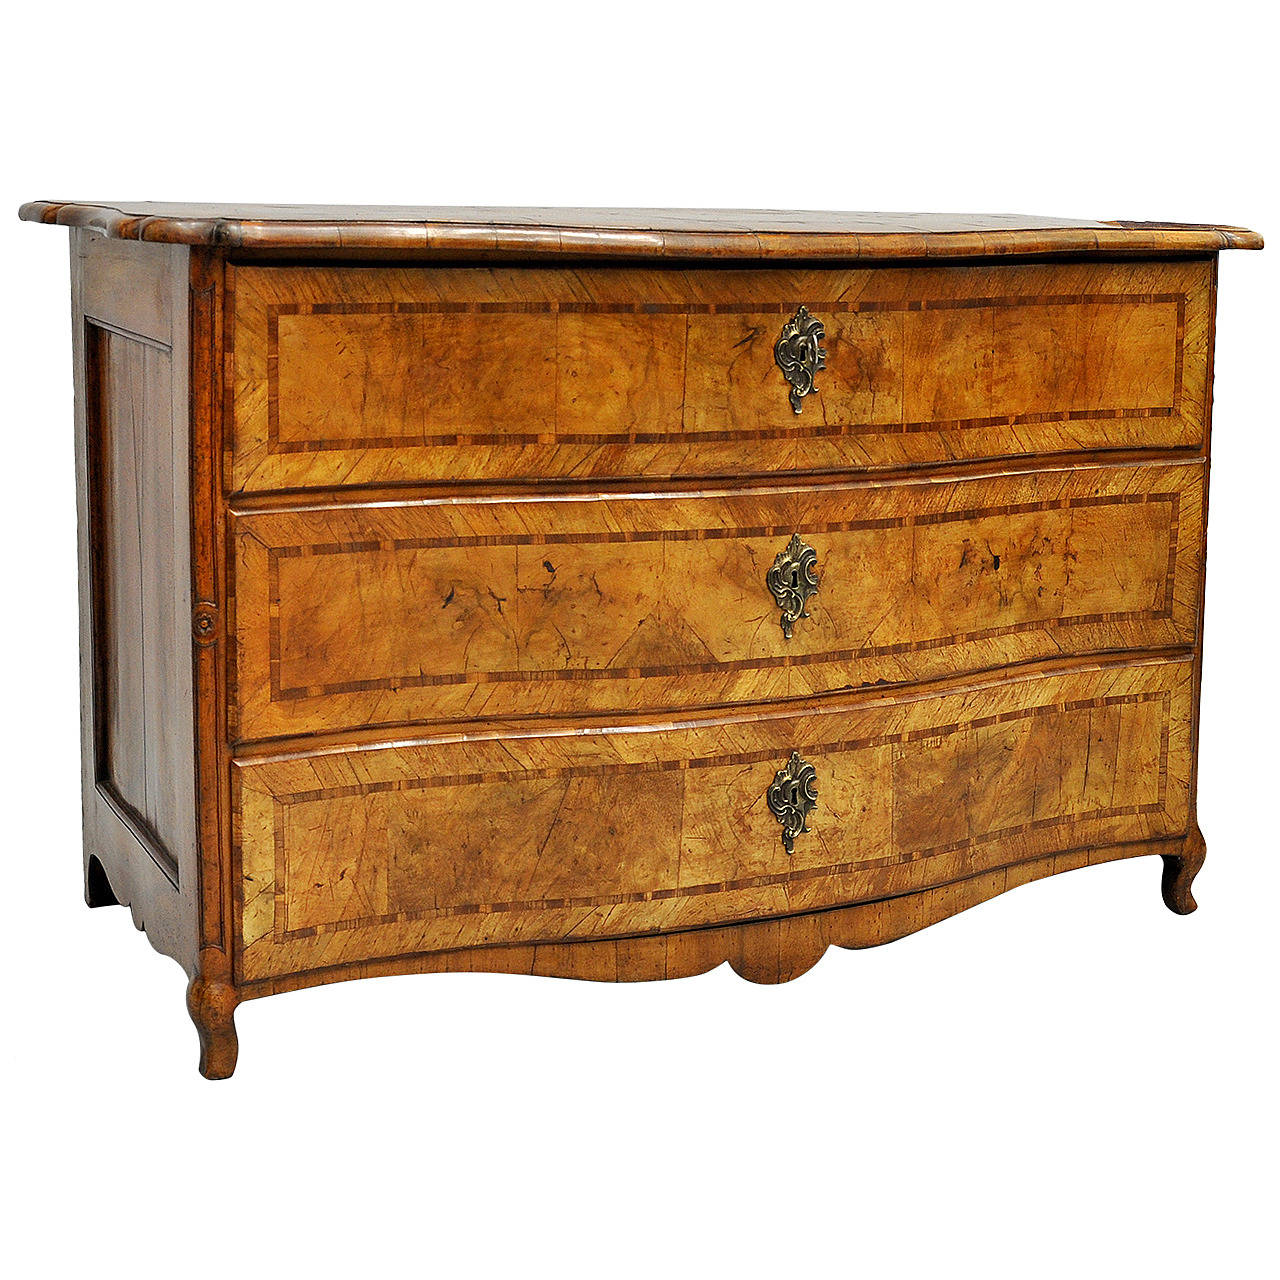 18th Century Italian Marquetry & Parquetry Chest of Drawers For Sale